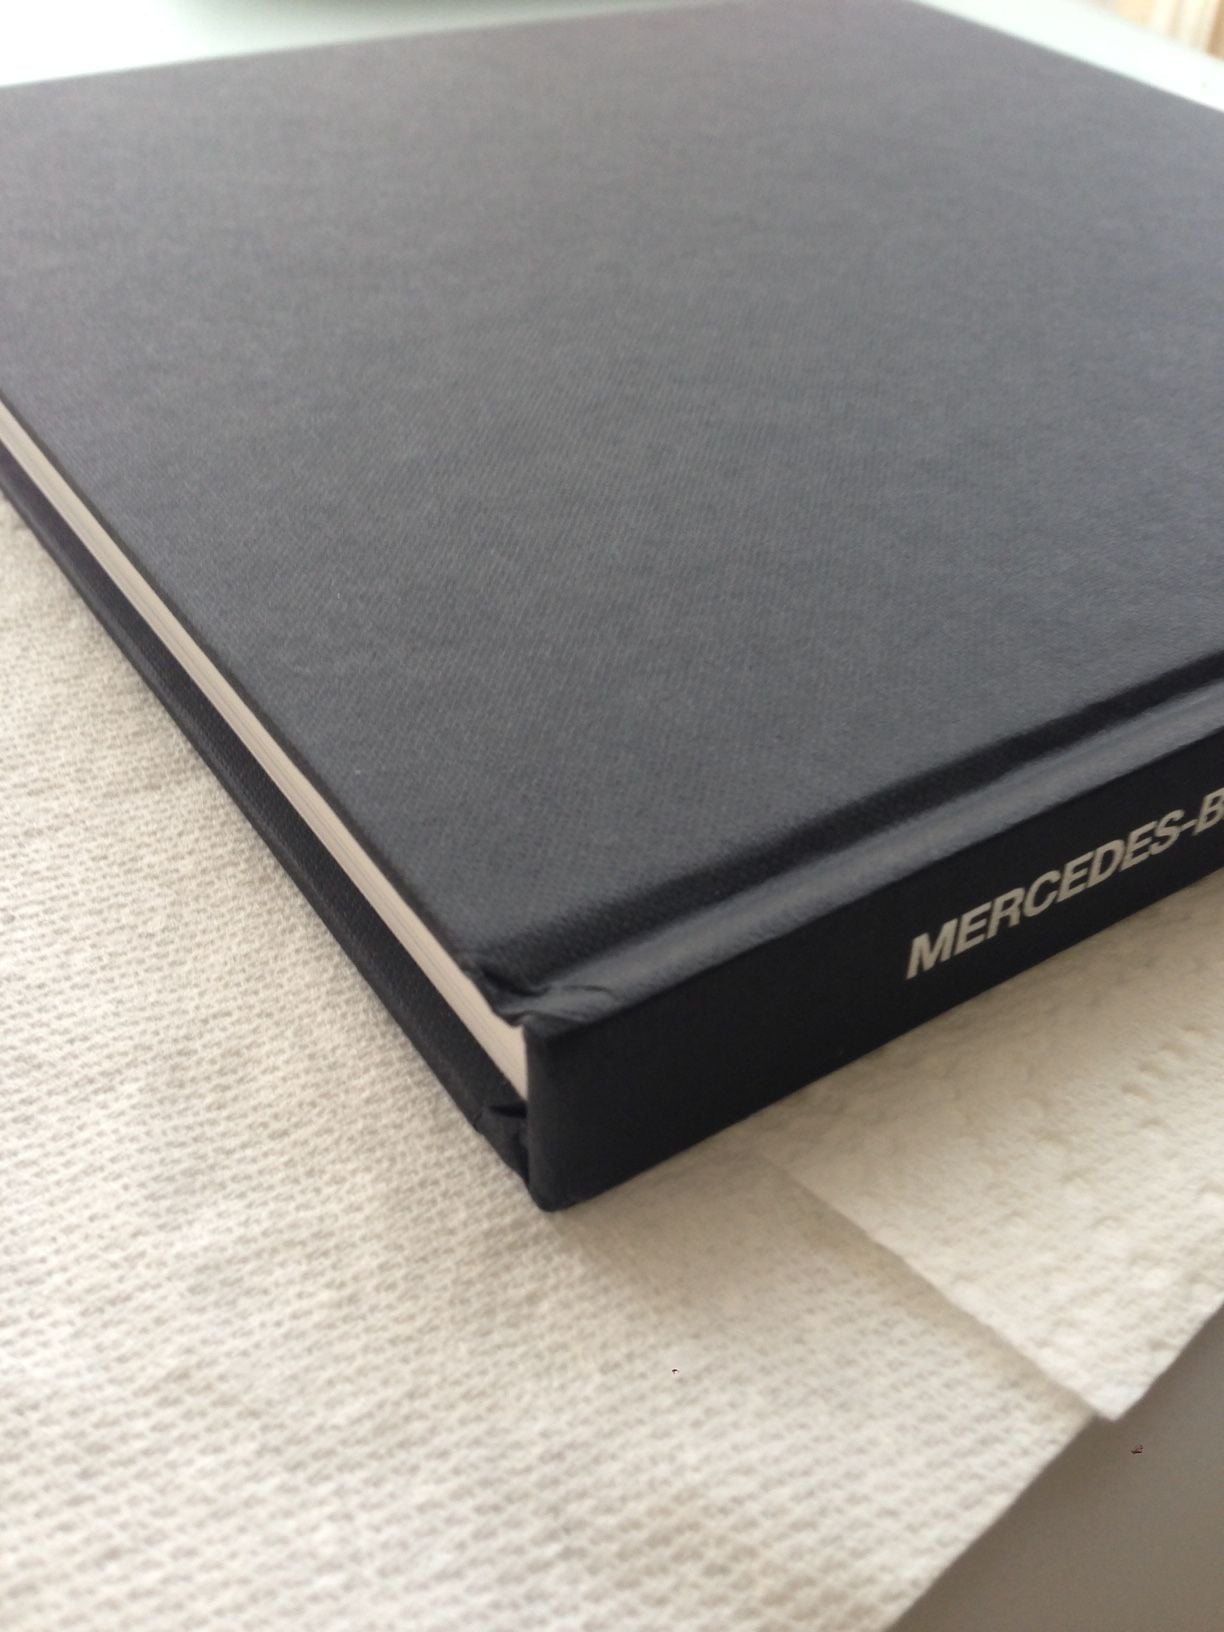 Miscellaneous - Mercedes-Benz SL R129 series 1989 to 2001 by Brian Long - Hardcover book $350 - New - 1989 to 2001 Mercedes-Benz SL-Class - Los Angeles, CA 90005, United States